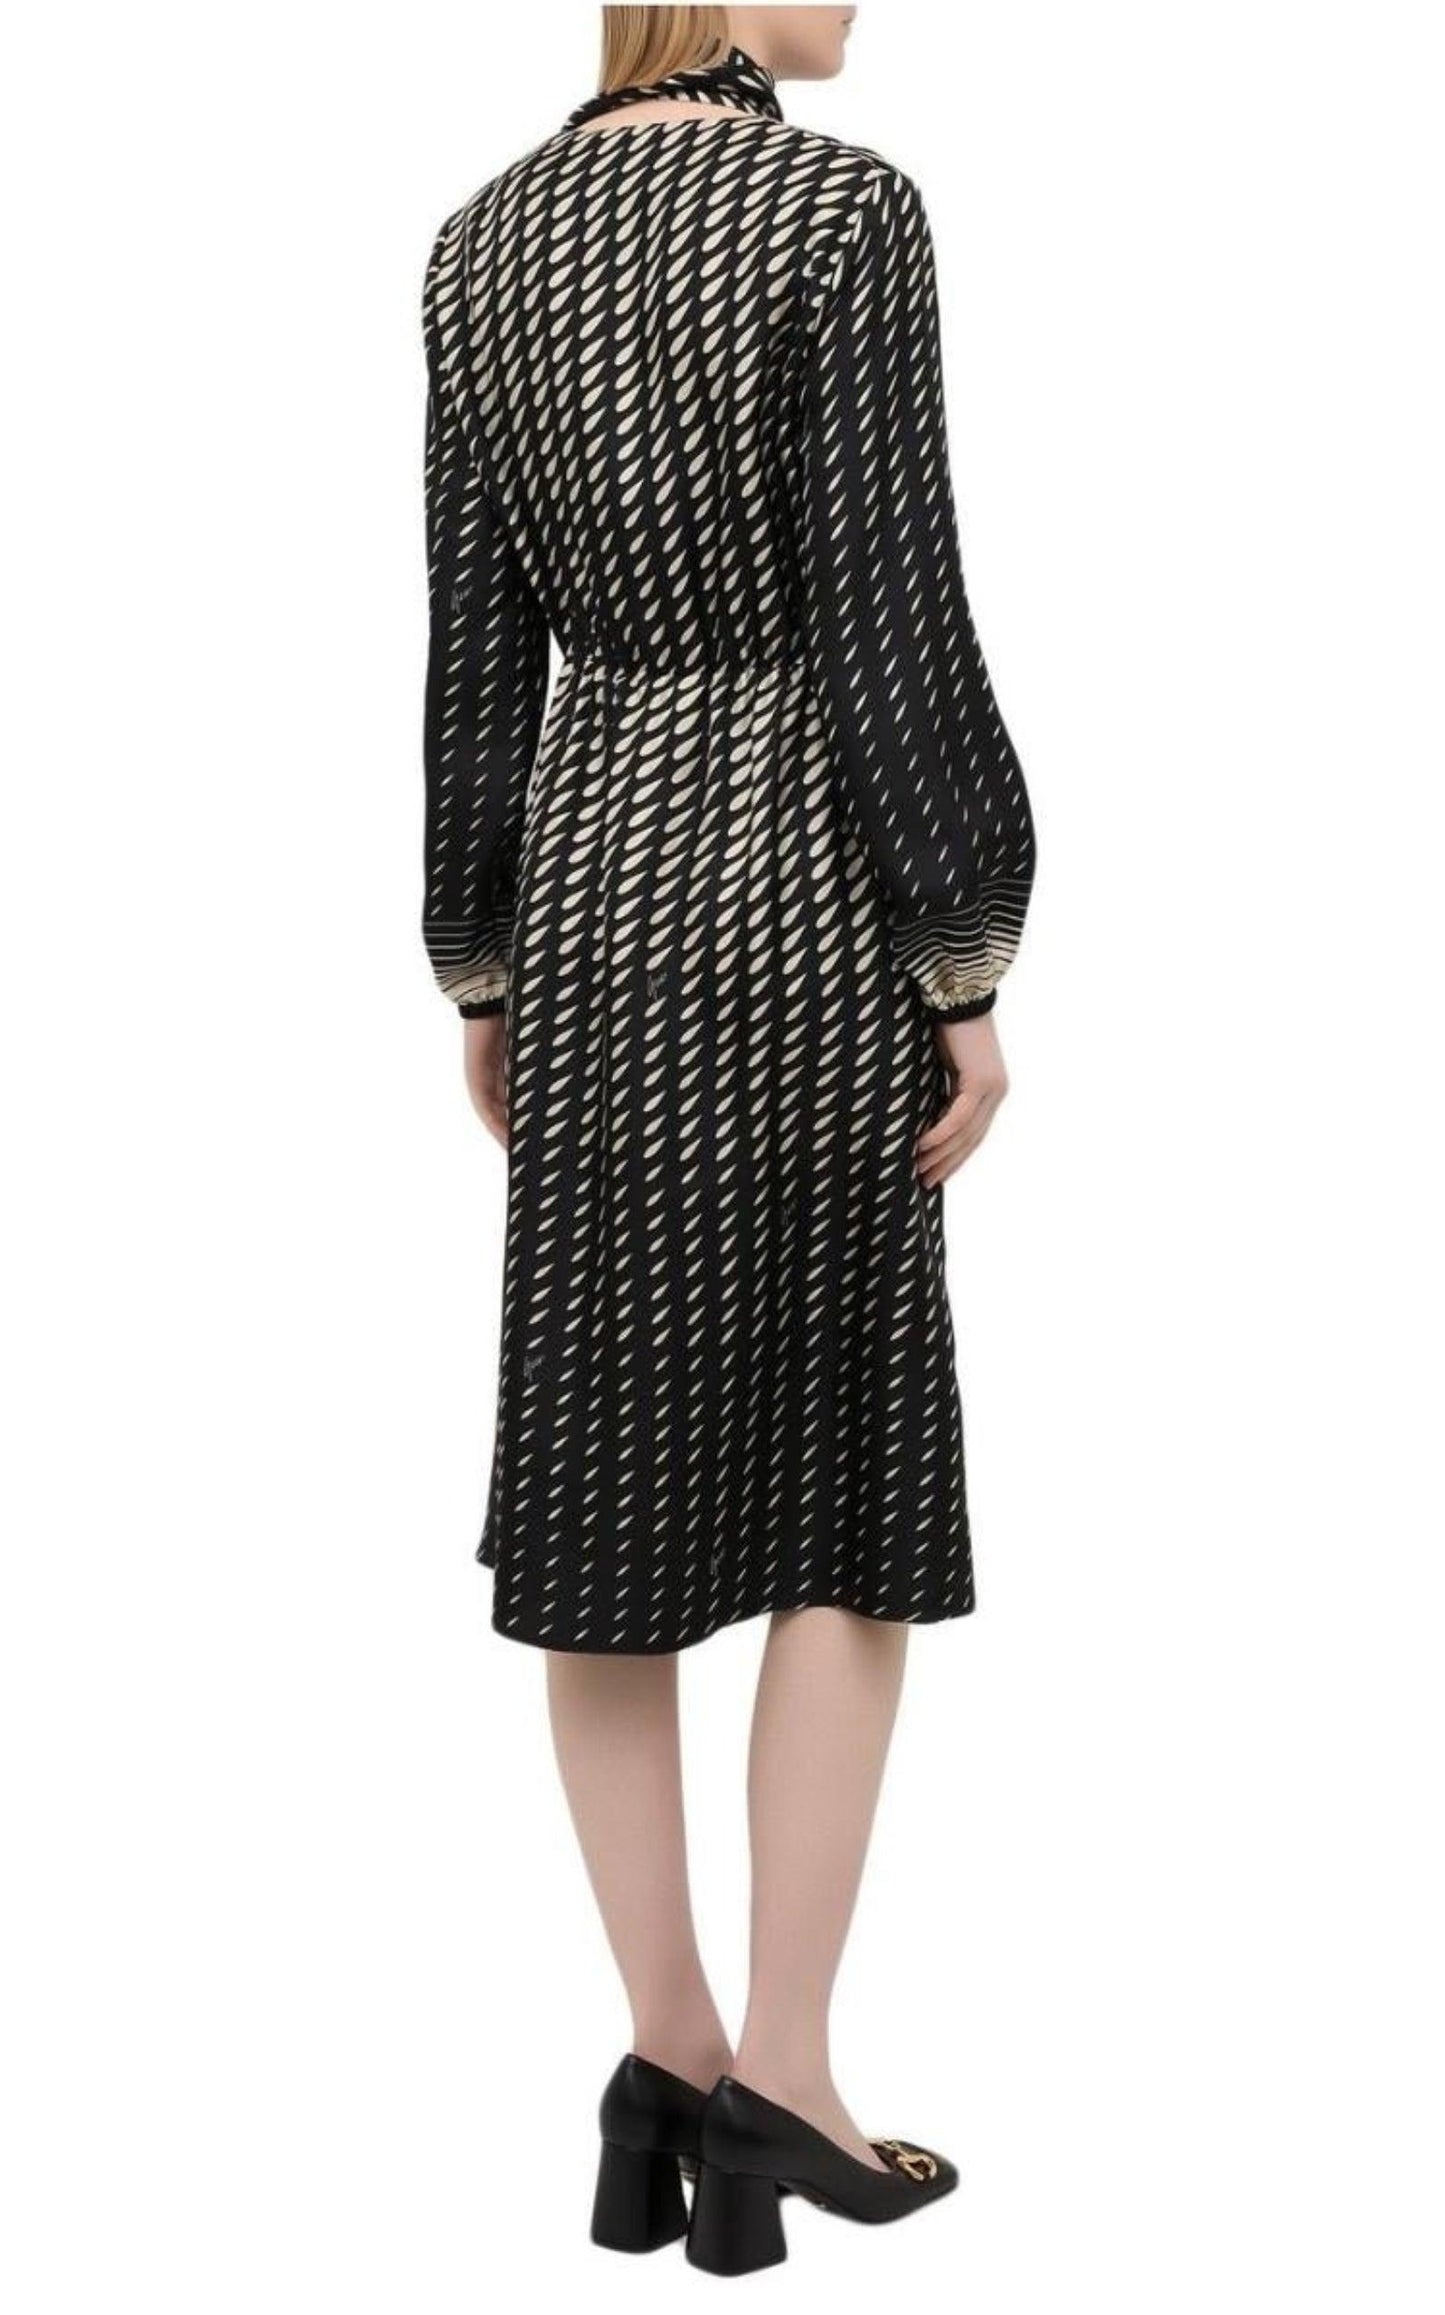  GucciPrinted Scarf Belted Wrap Dress - Runway Catalog